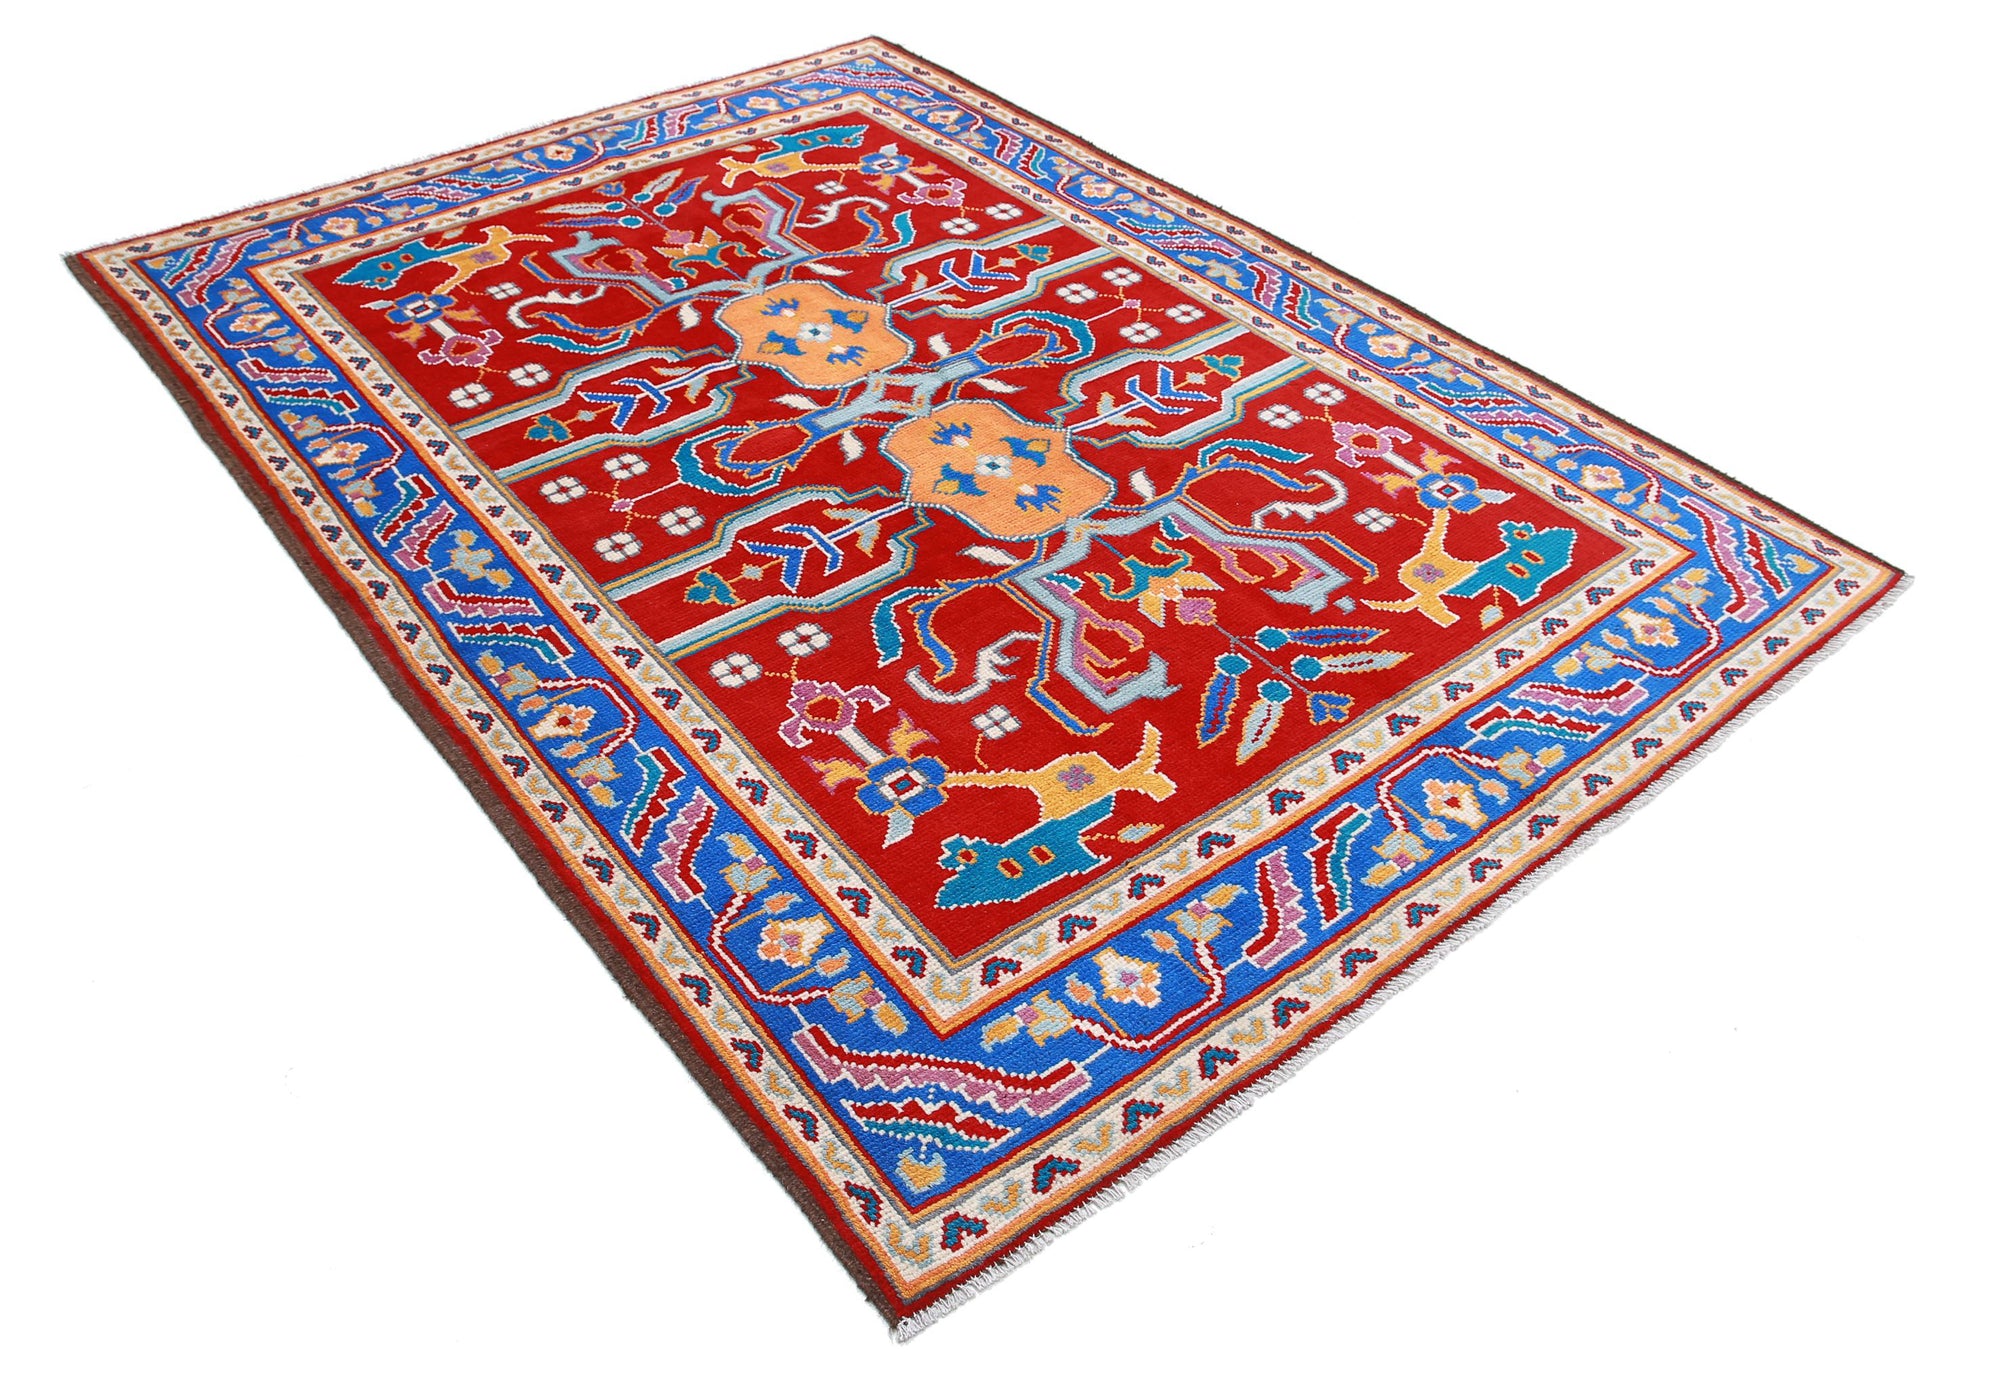 Revival-hand-knotted-qarghani-wool-rug-5014220-1.jpg